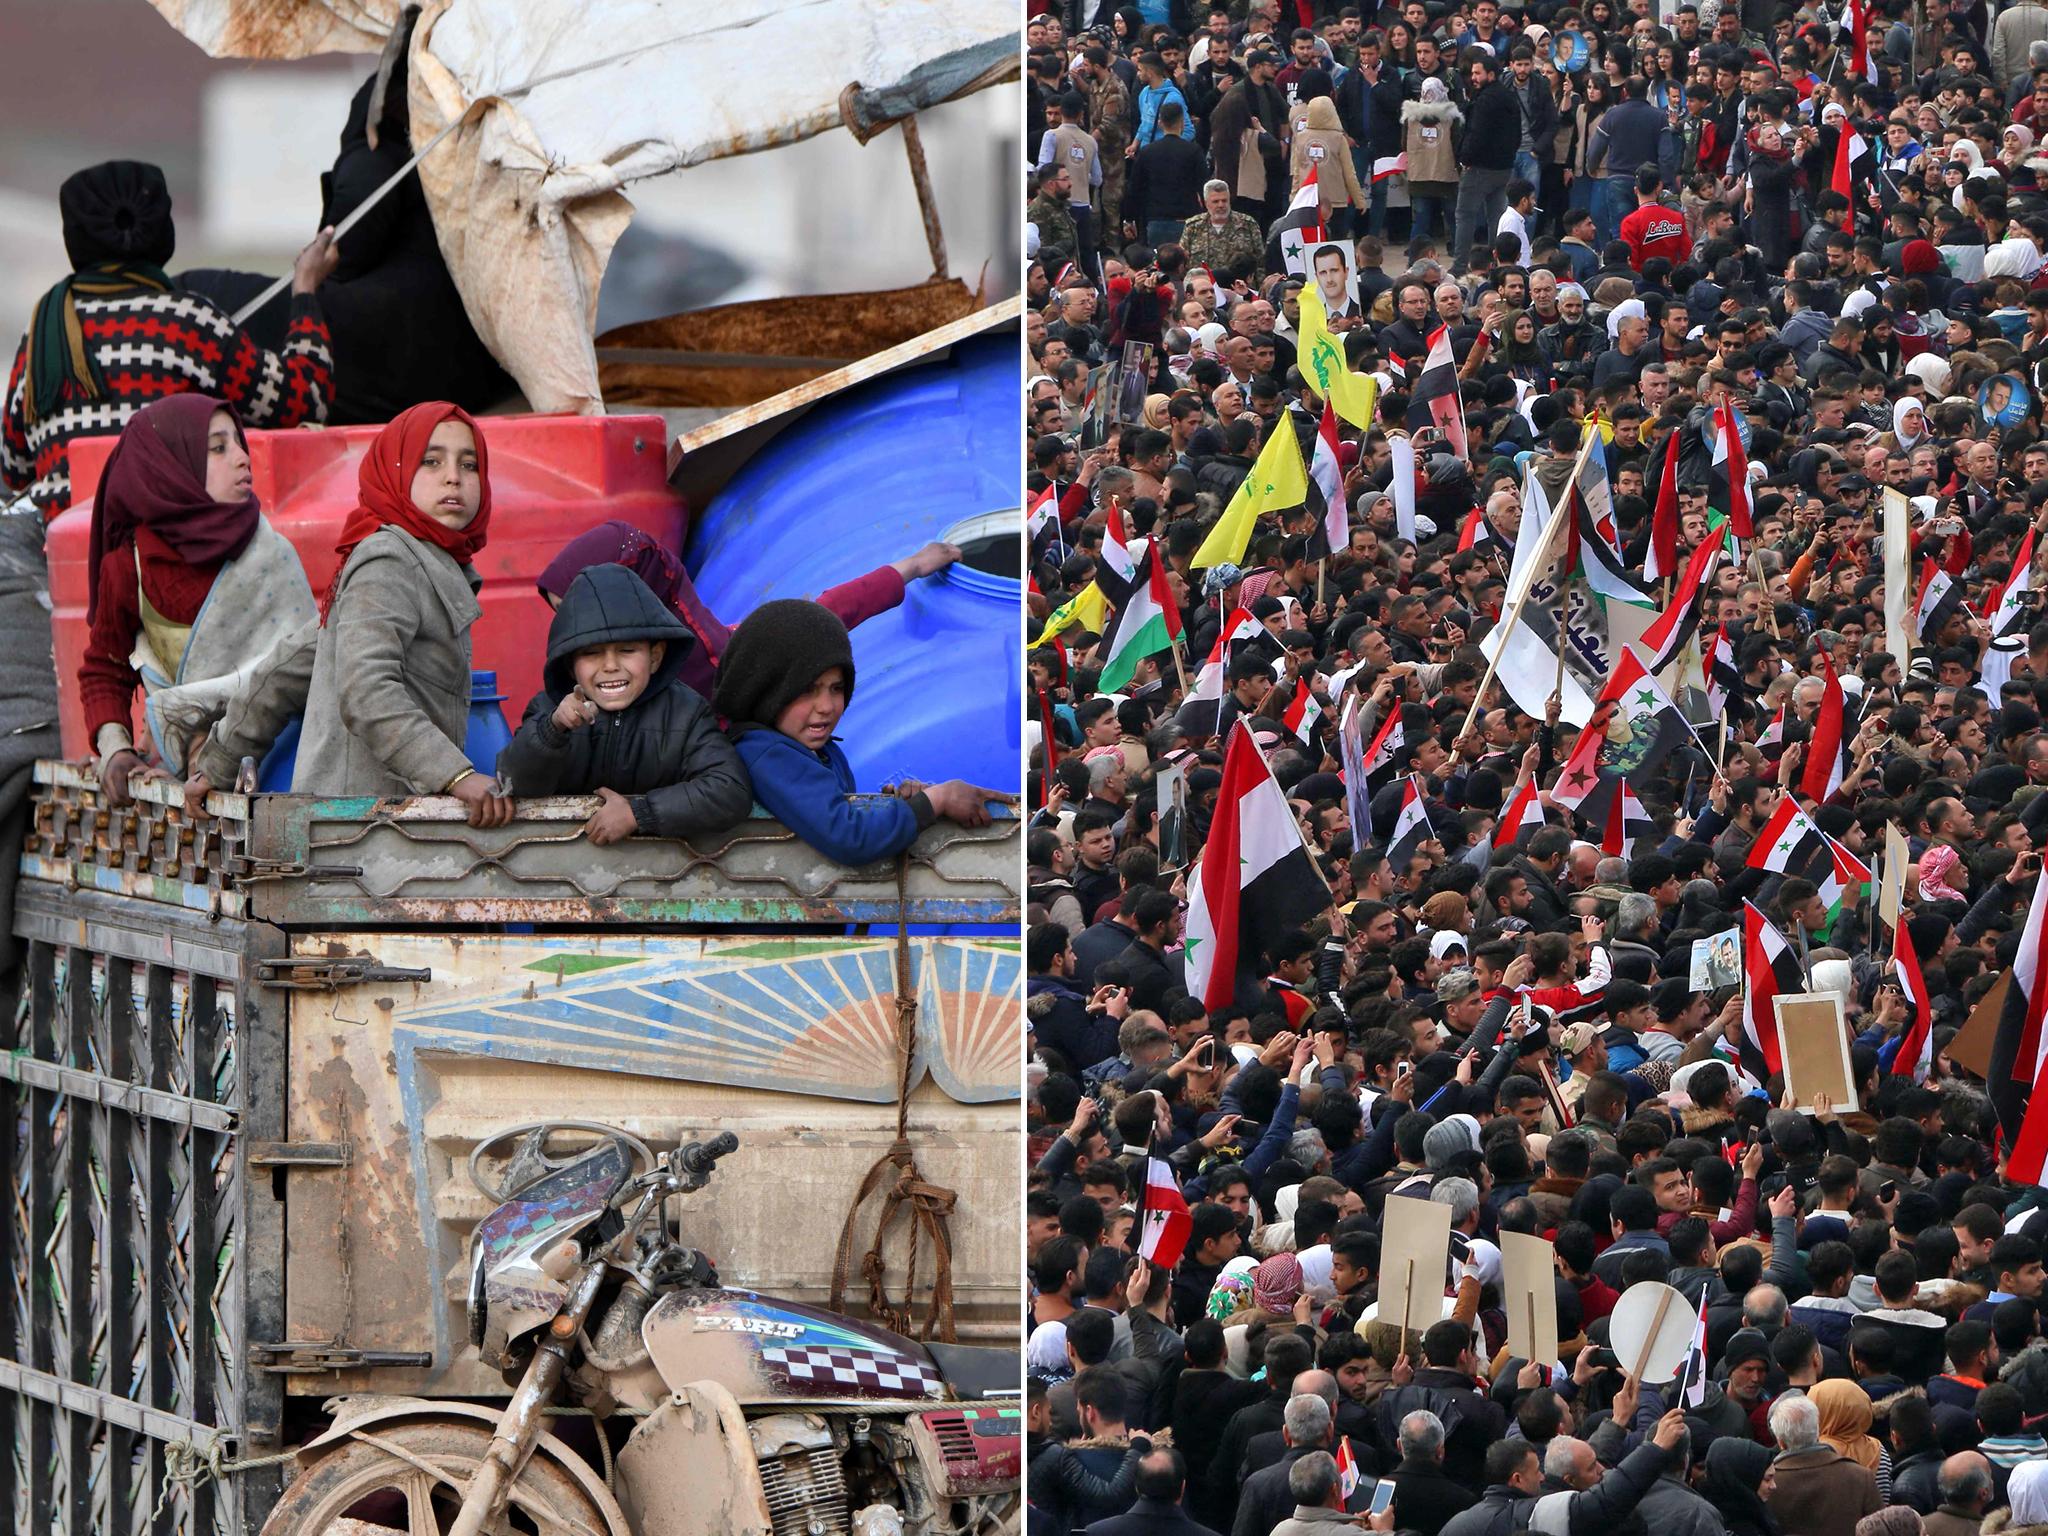 Left: In the west of Syria's northern province of Aleppo on 16 February, people flee advancing Syrian government forces. Right: Meanwhile, crowds gather to celebrate at the Saadallah al-Jabiri square in Aleppo